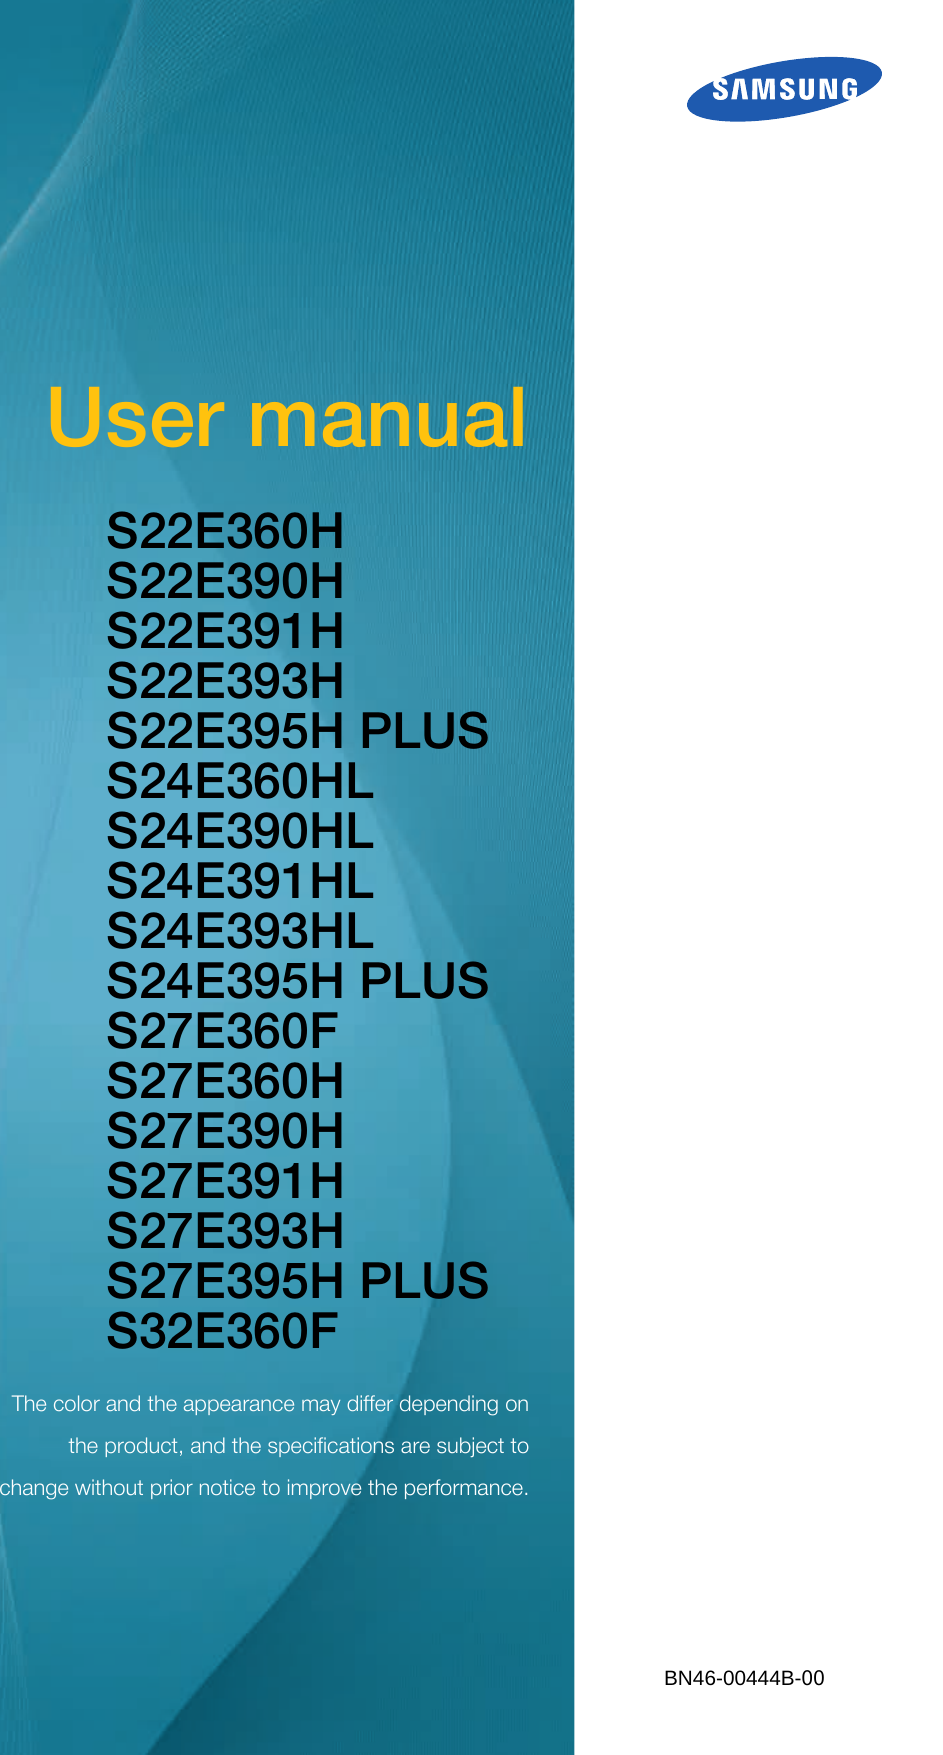 User manualS22E360HS22E390HS22E391HS22E393HS22E395H PLUSS24E360HLS24E390HLS24E391HLS24E393HLS24E395H PLUSS27E360FS27E360HS27E390HS27E391HS27E393HS27E395H PLUSS32E360F The color and the appearance may differ depending onthe product, and the specifications are subject tochange without prior notice to improve the performance.BN46-00444B-00